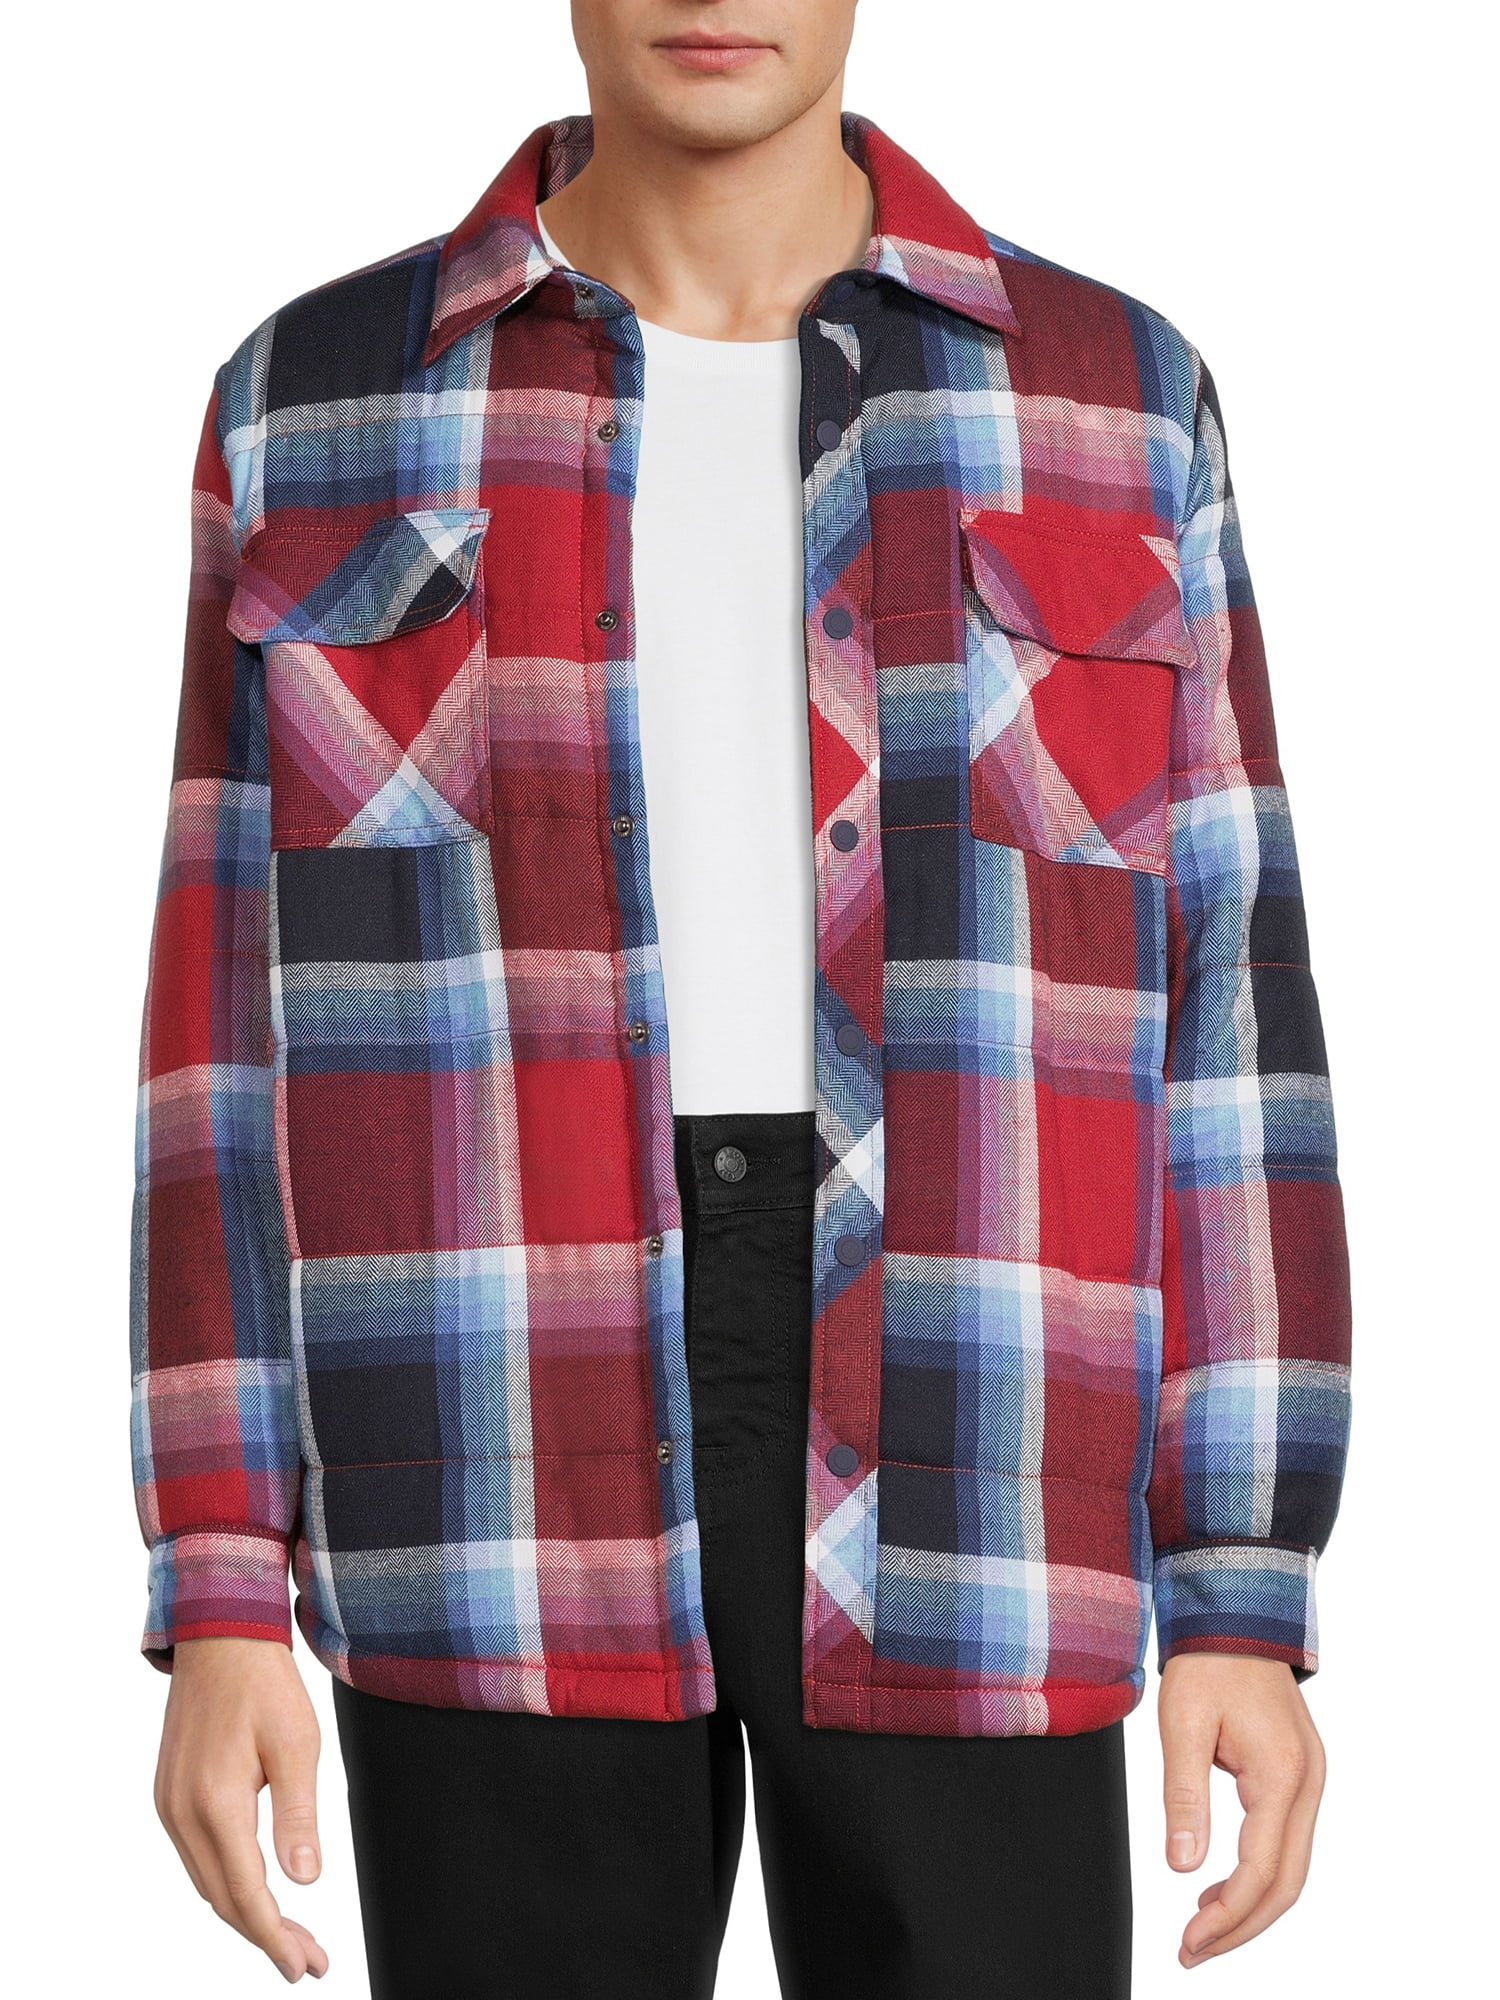 George Men's and Big Men's Shirt Jacket, Sizes up to 3XL